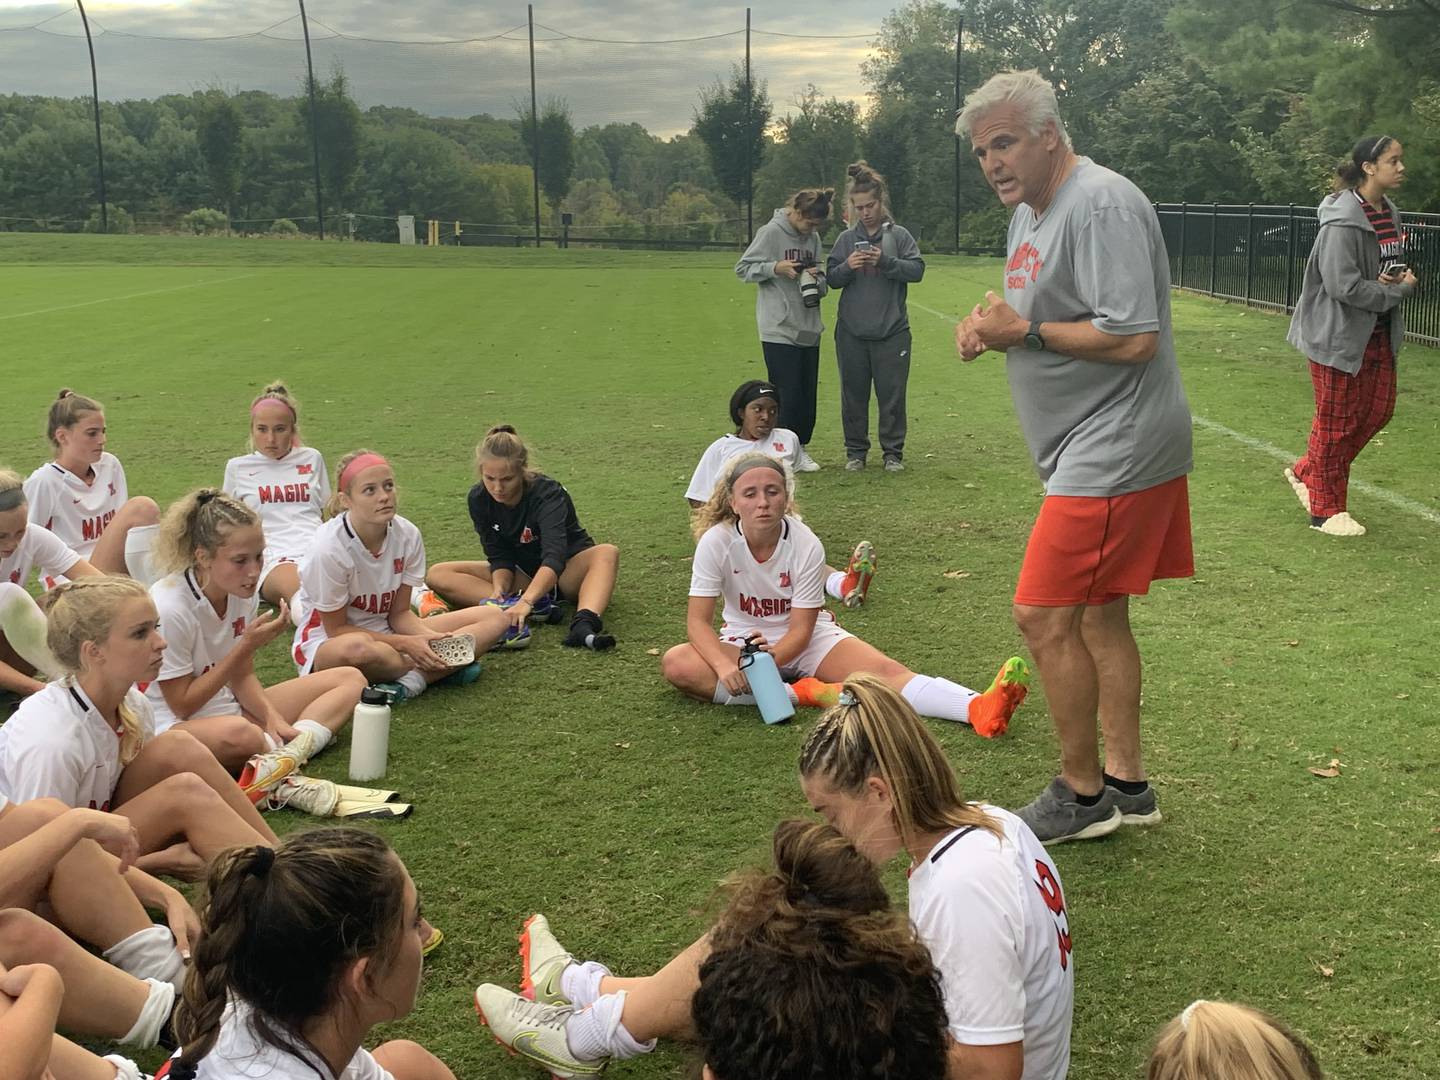 Mercy soccer coach Doug Pryor addressed his team after Wednesday's 1-0 victory over No. 5 McDonogh in an IAAM A Conference contest in Owings Mills.